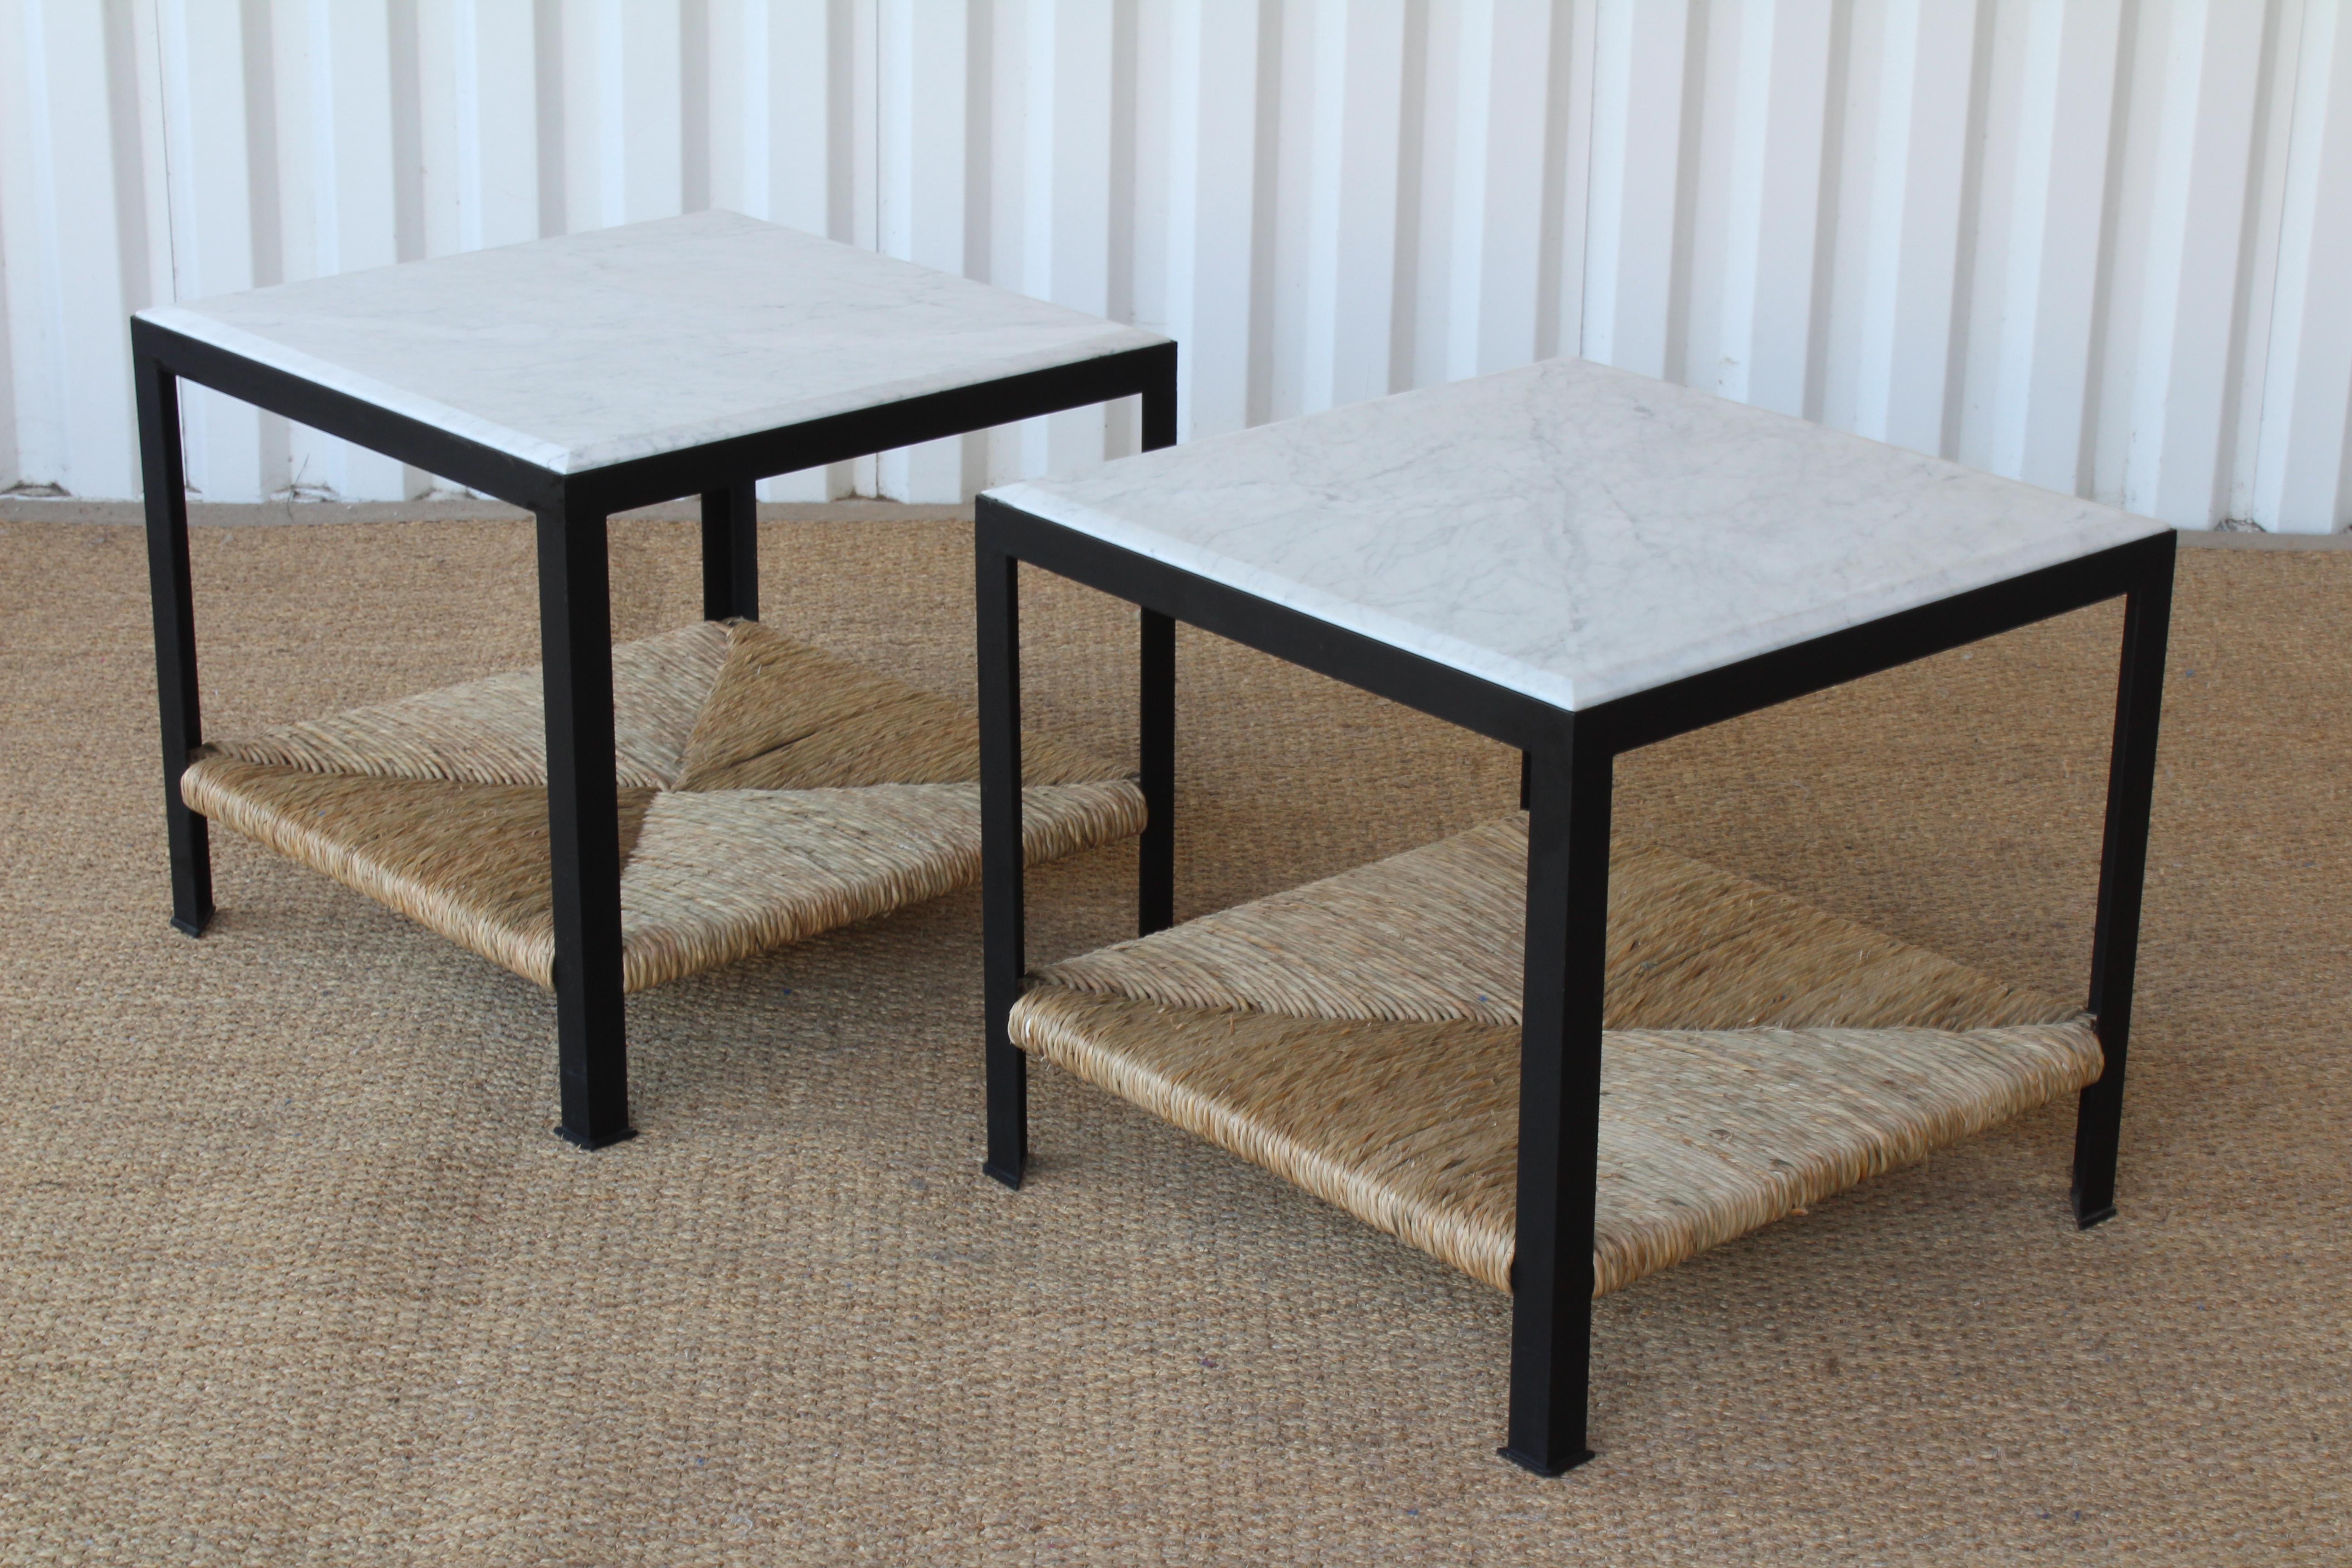 Pair of custom made steel framed end tables with marble tops and woven rush bottom shelves. Each end table is made of solid steel in a satin black powdercoated finish. The tops are beveled Italian marble. Each table was handwoven with rush bottom